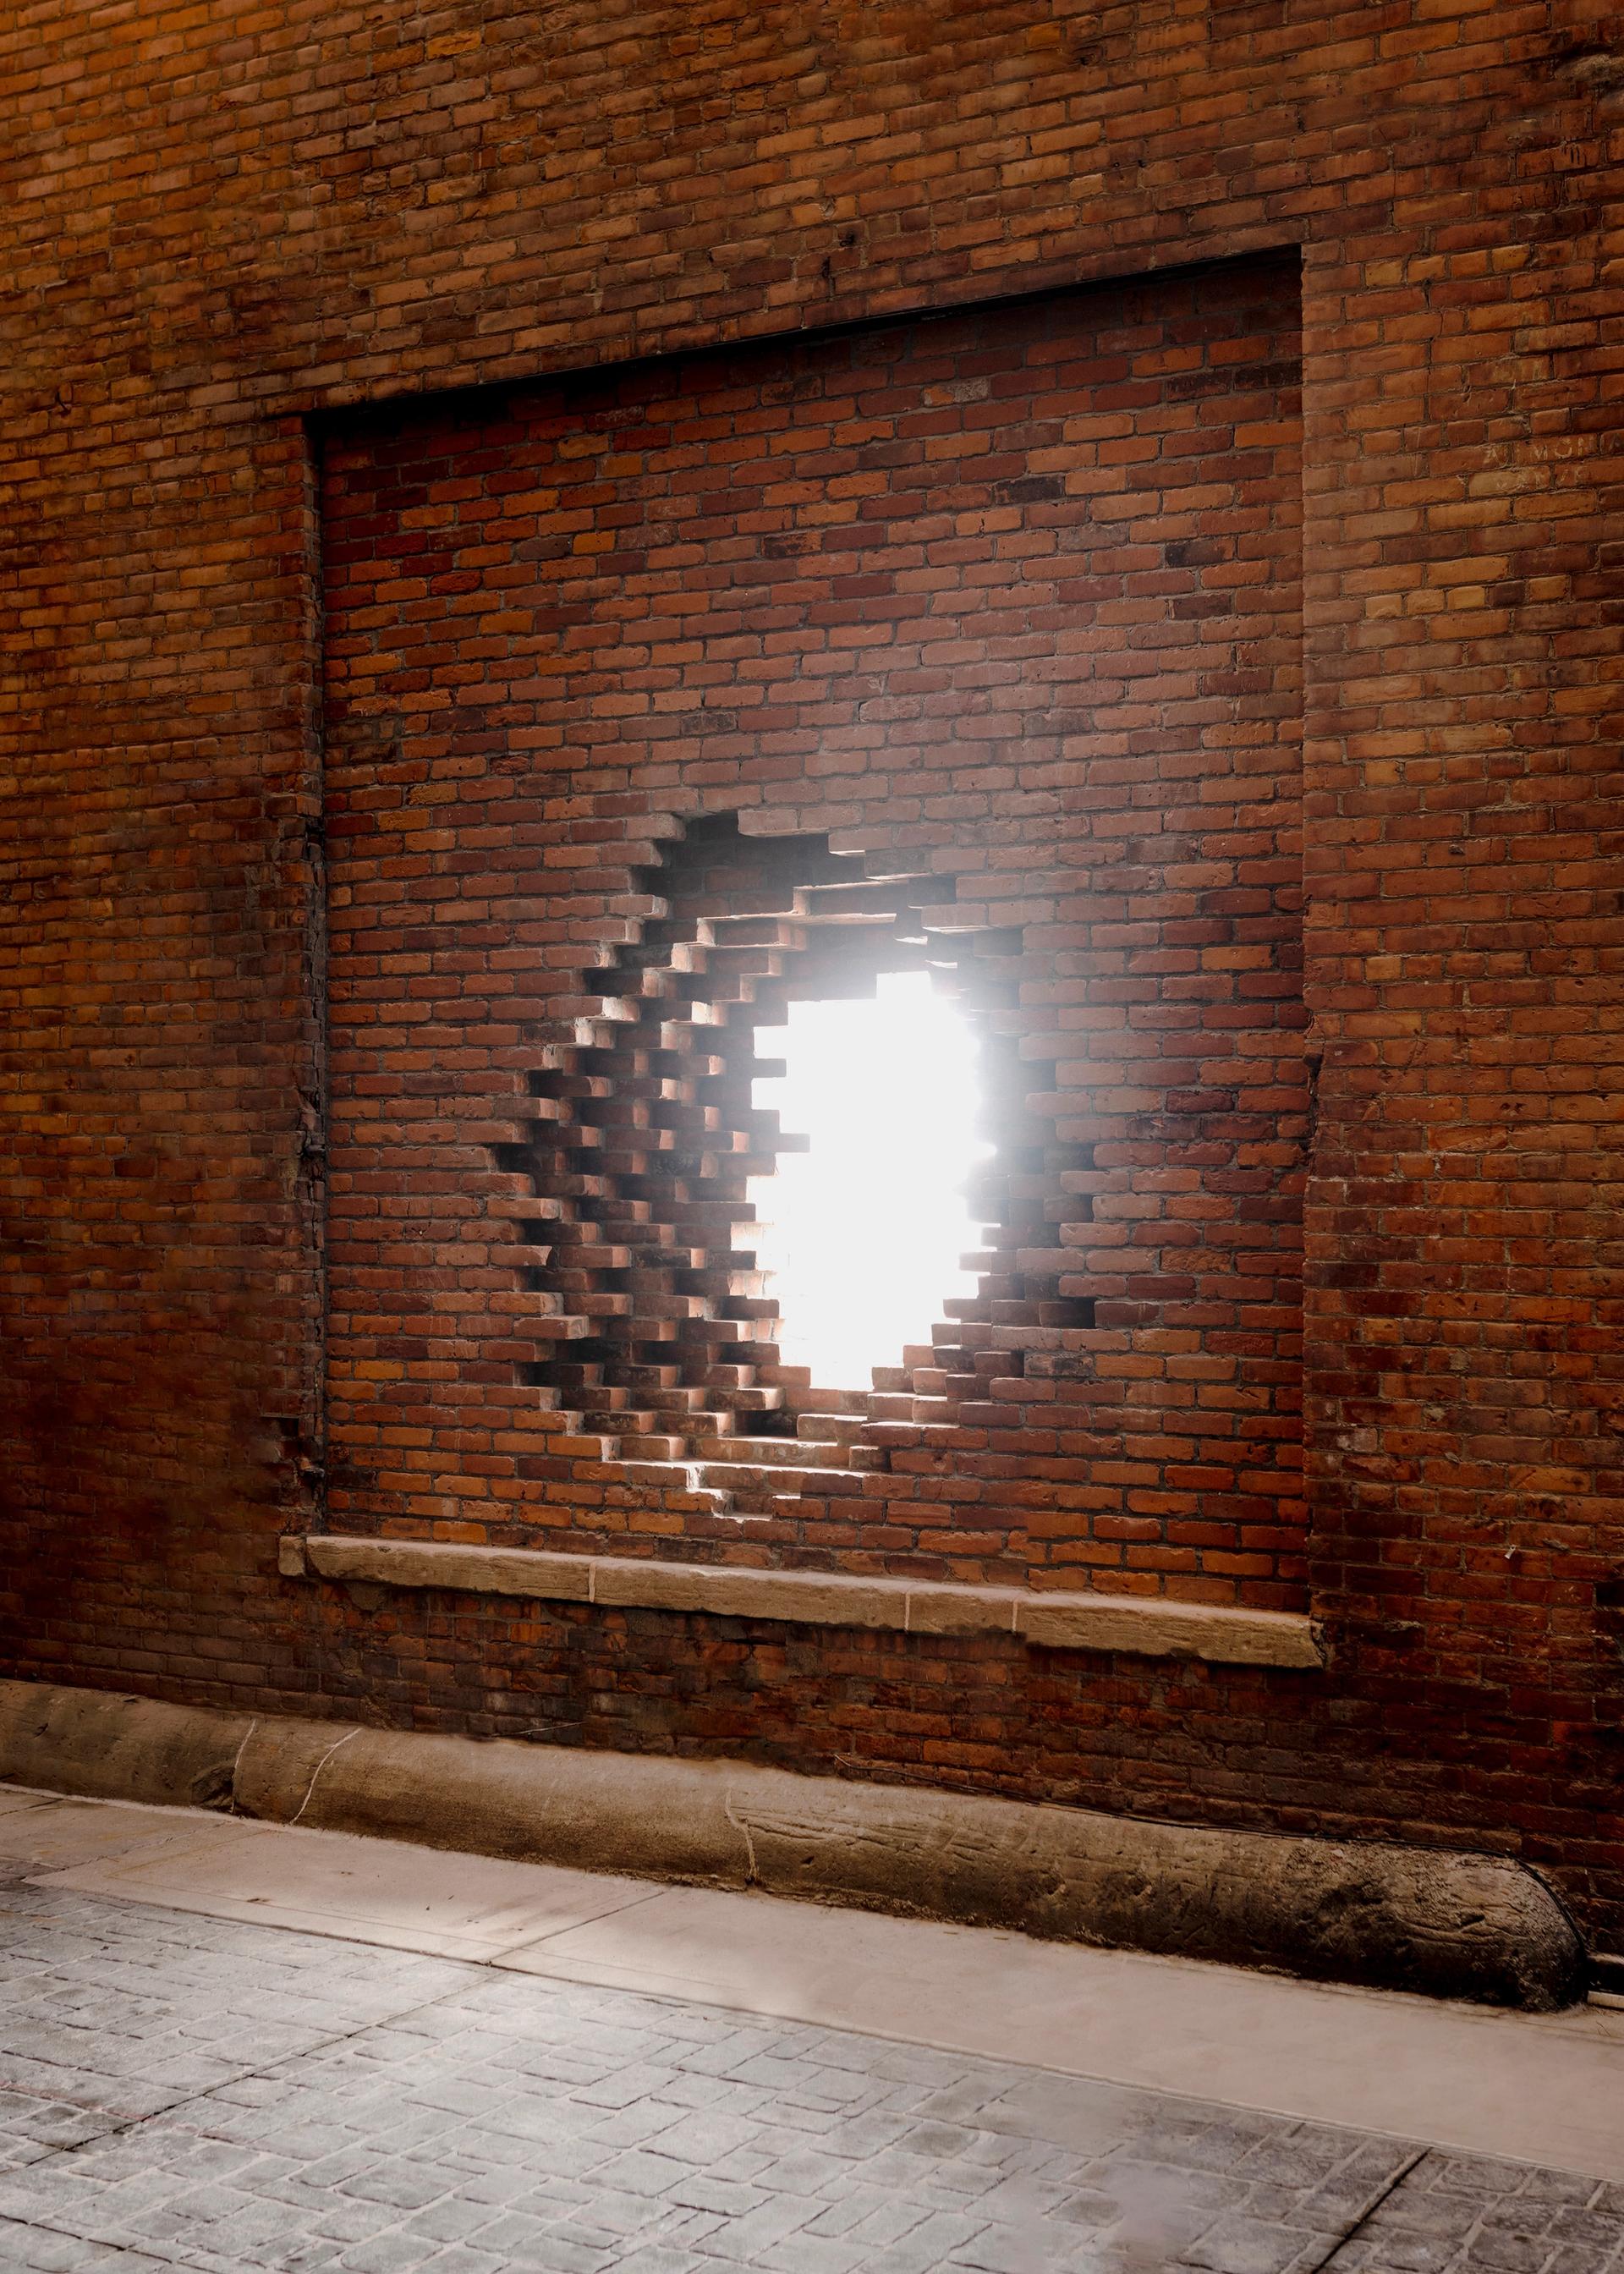 Snarkitecture’s "portal" intervention to the original brick façade of the historic L.B. King and Company building will add a public art-element to the structure Photo: Lyndon French